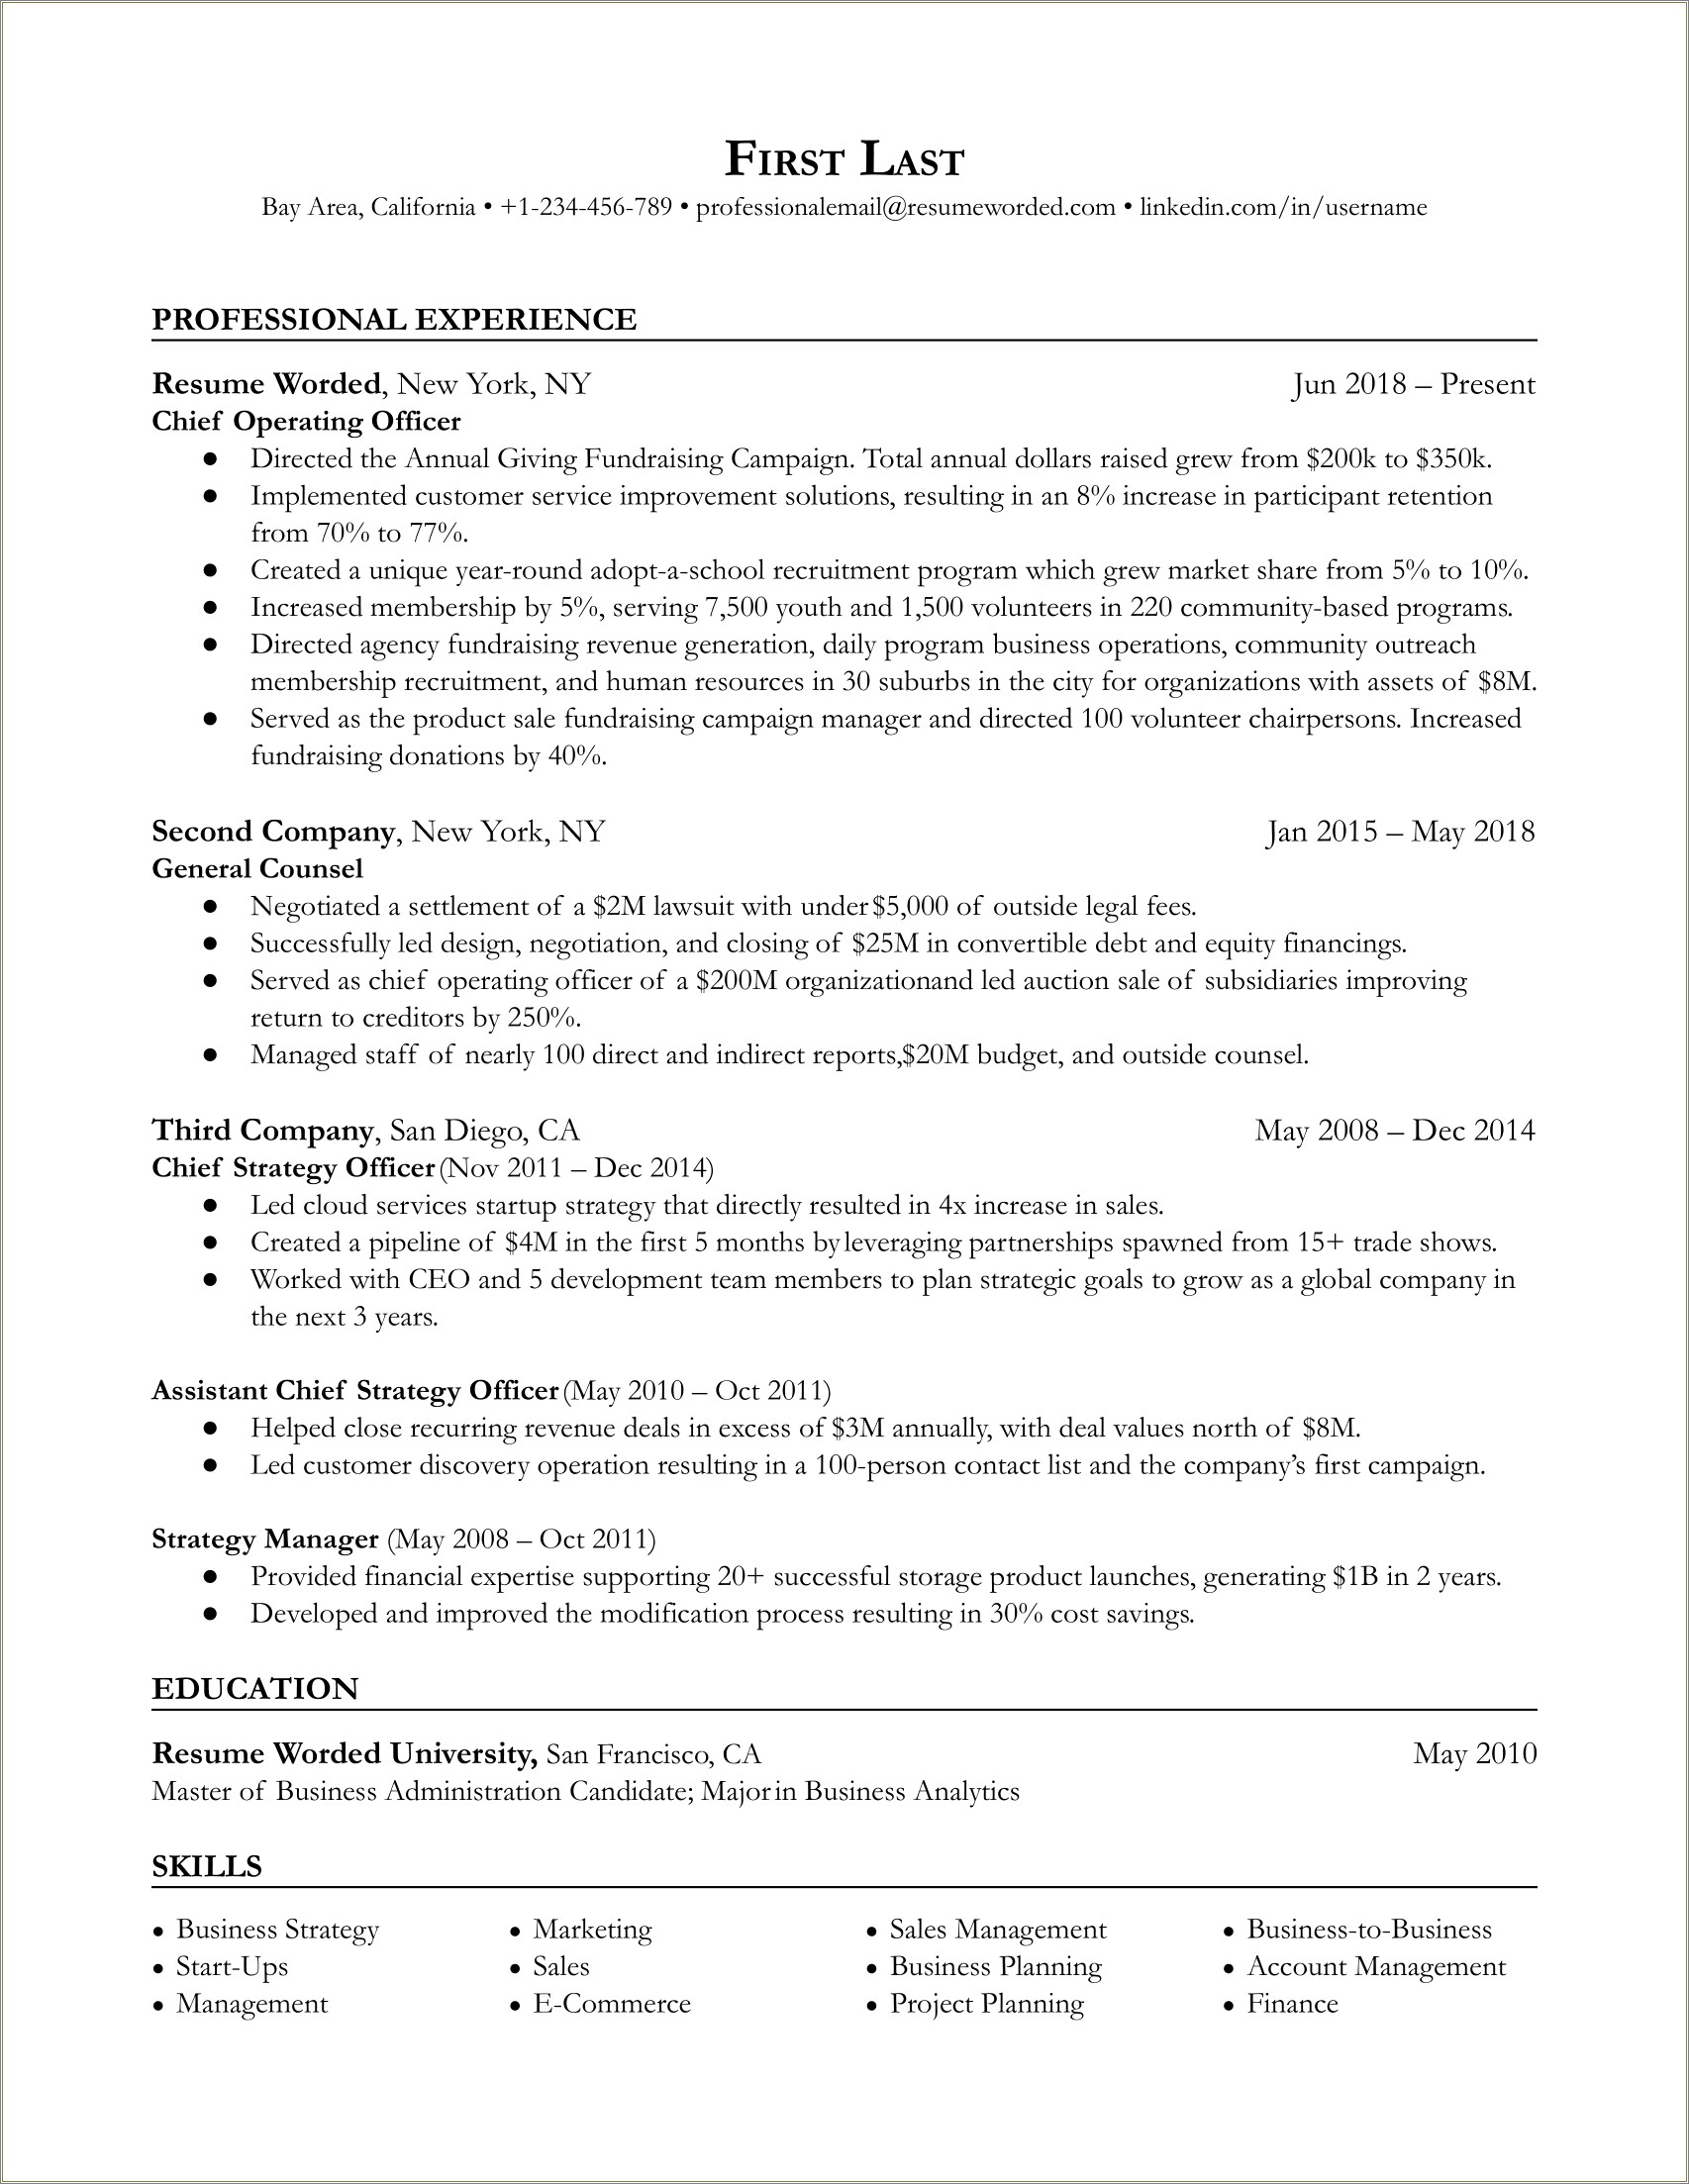 core-competencies-research-sample-resume-resume-example-gallery